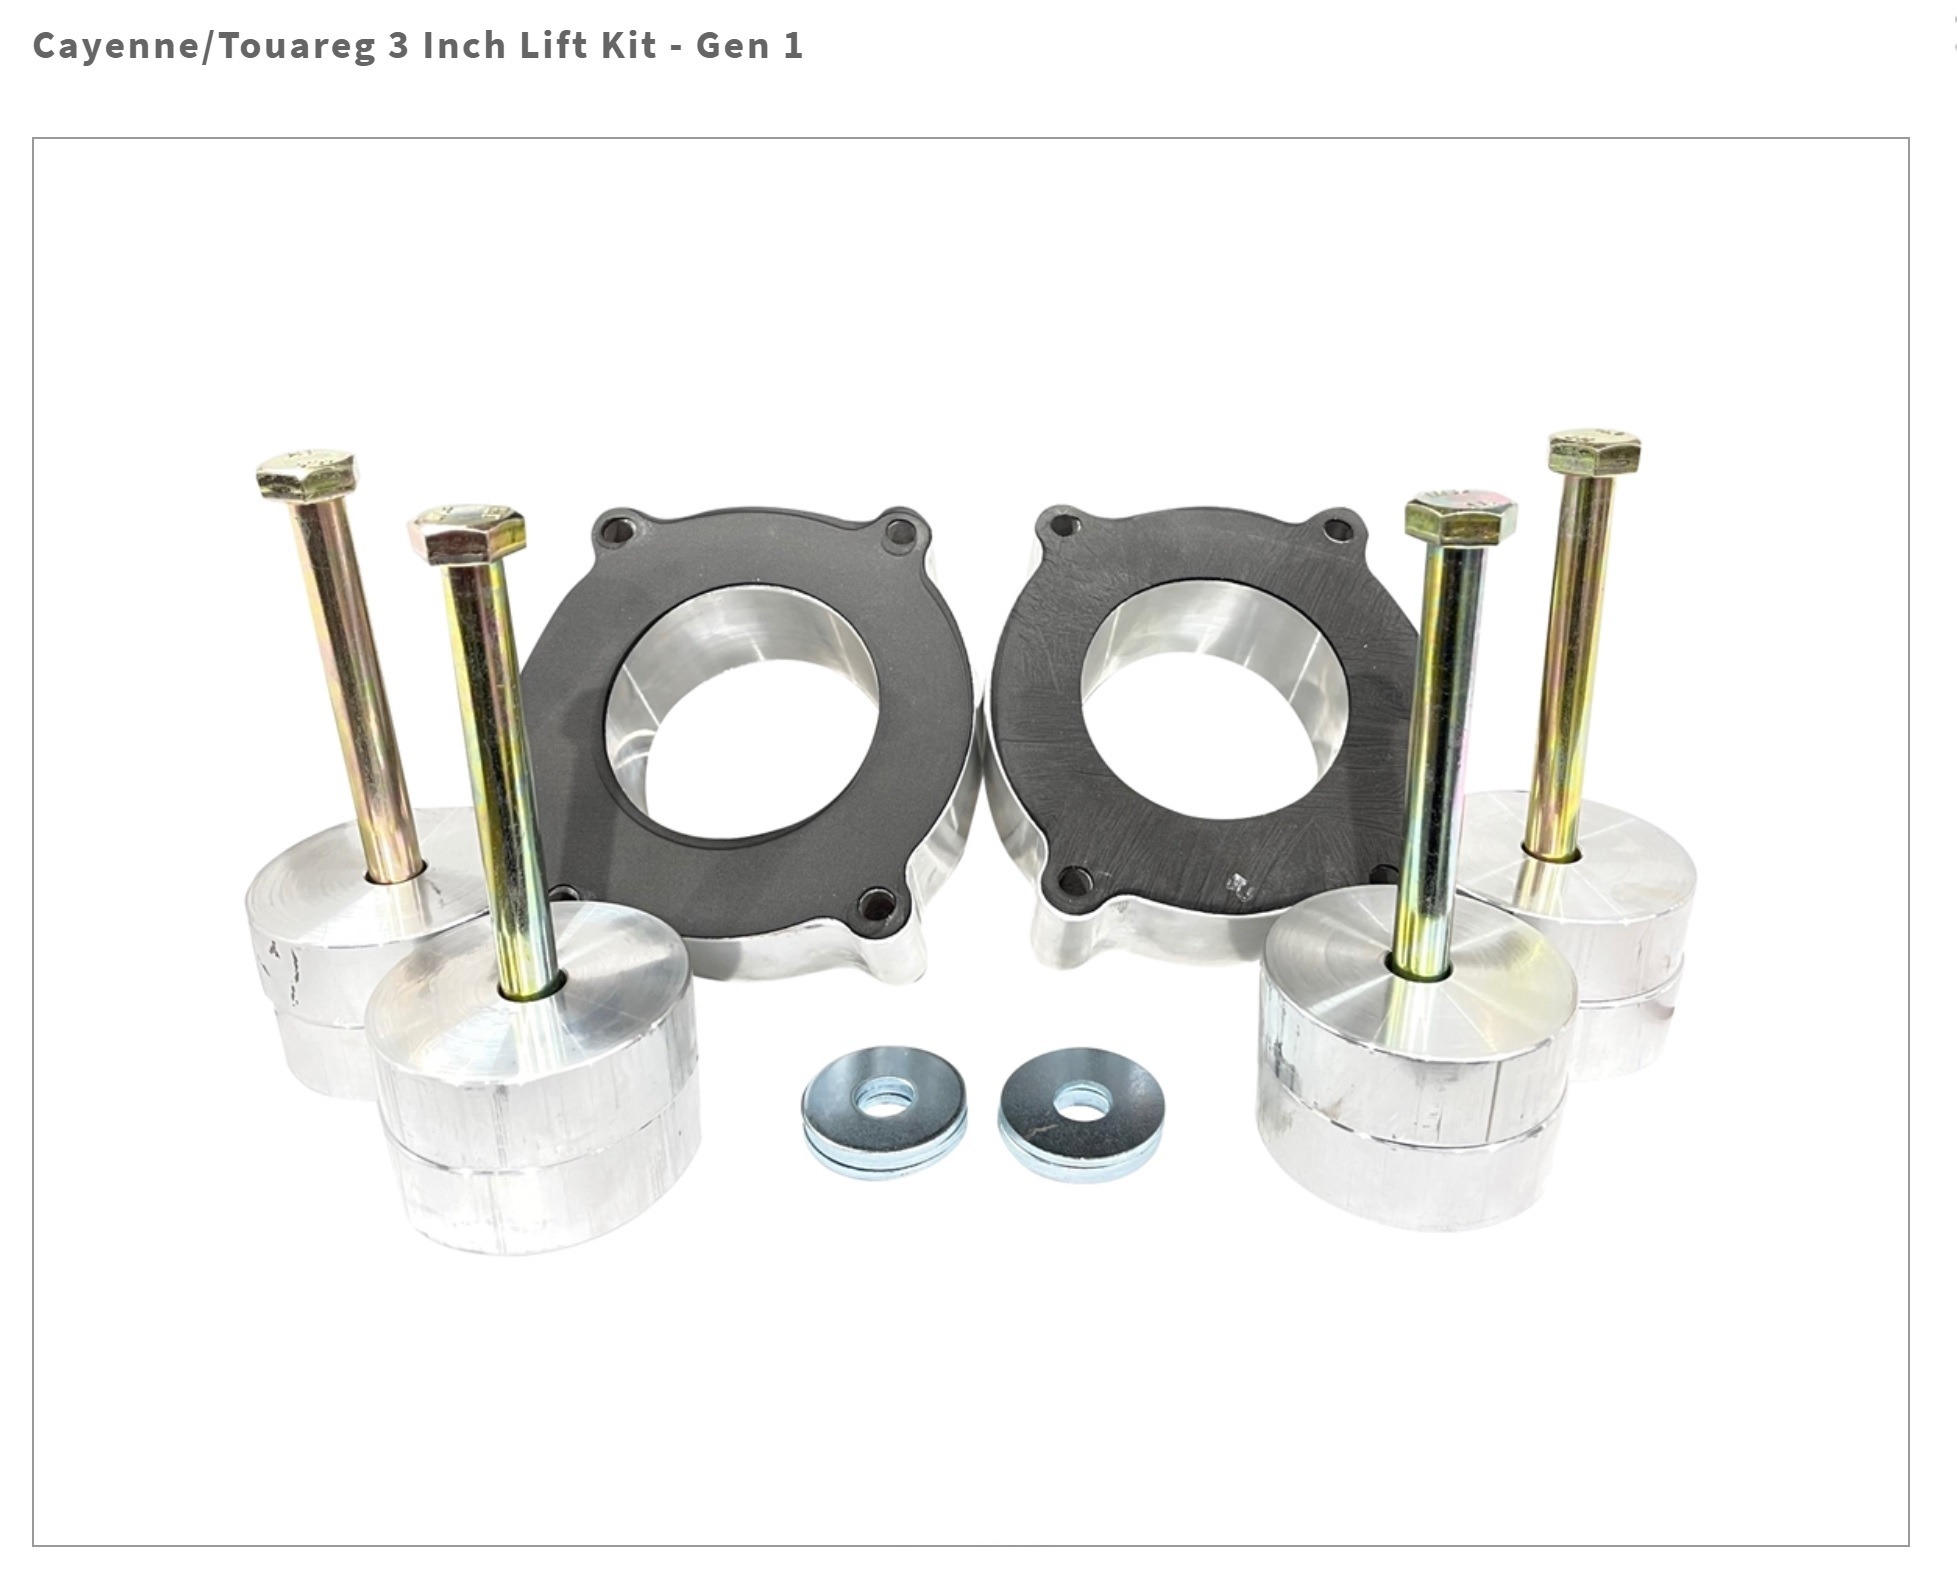 Machined from 6061 aluminum solid block, these lift kits will never wear out or fail.